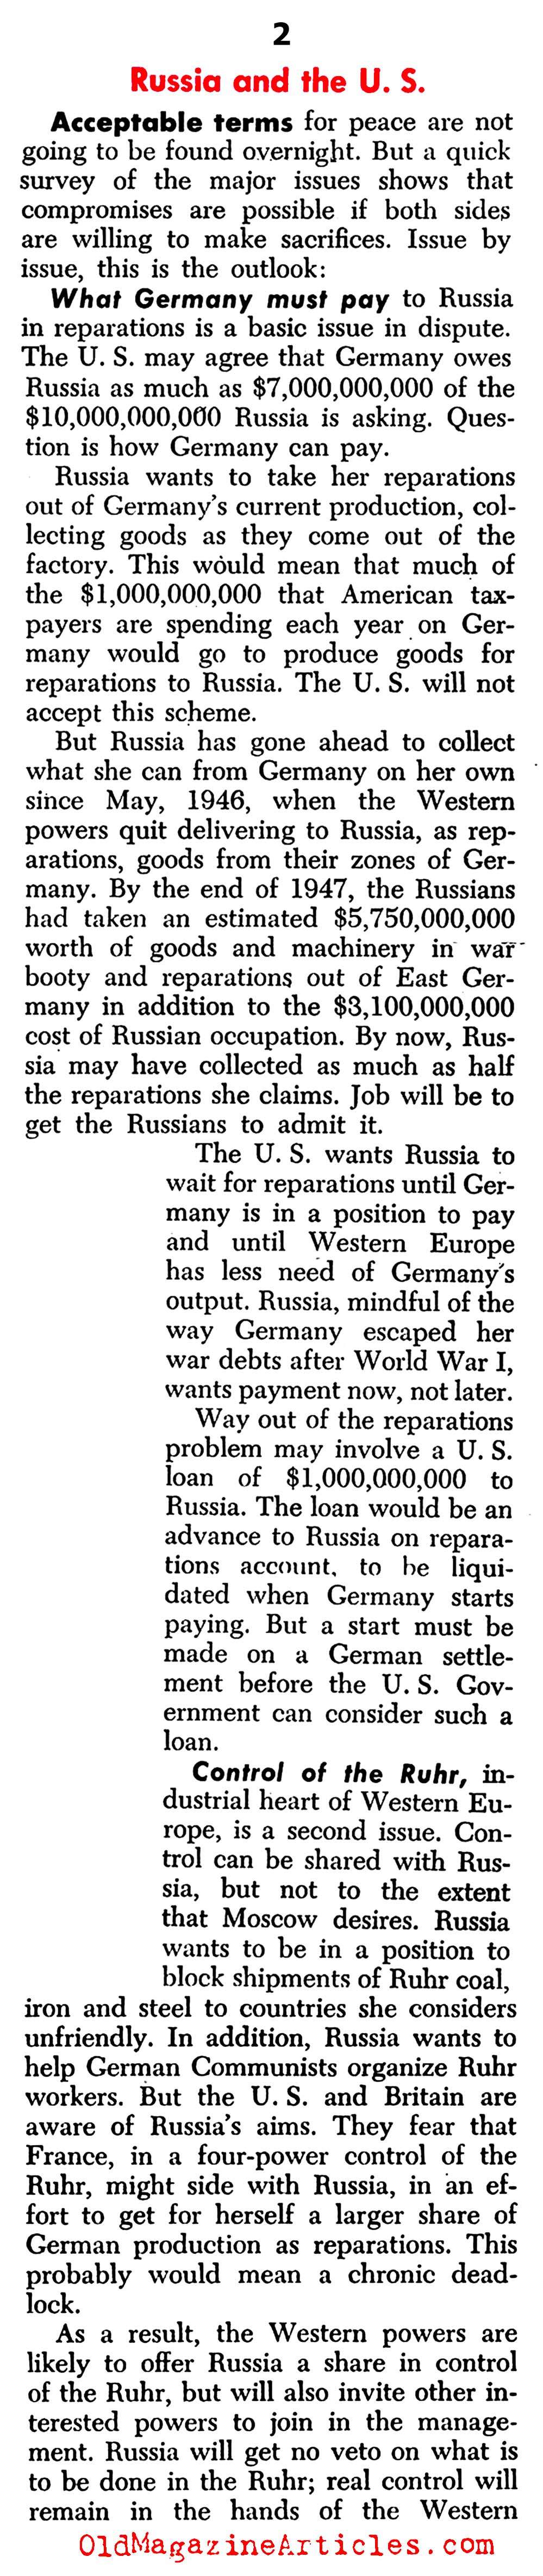 Can There be Peace with Stalin? (United States News & World Report, 1948)